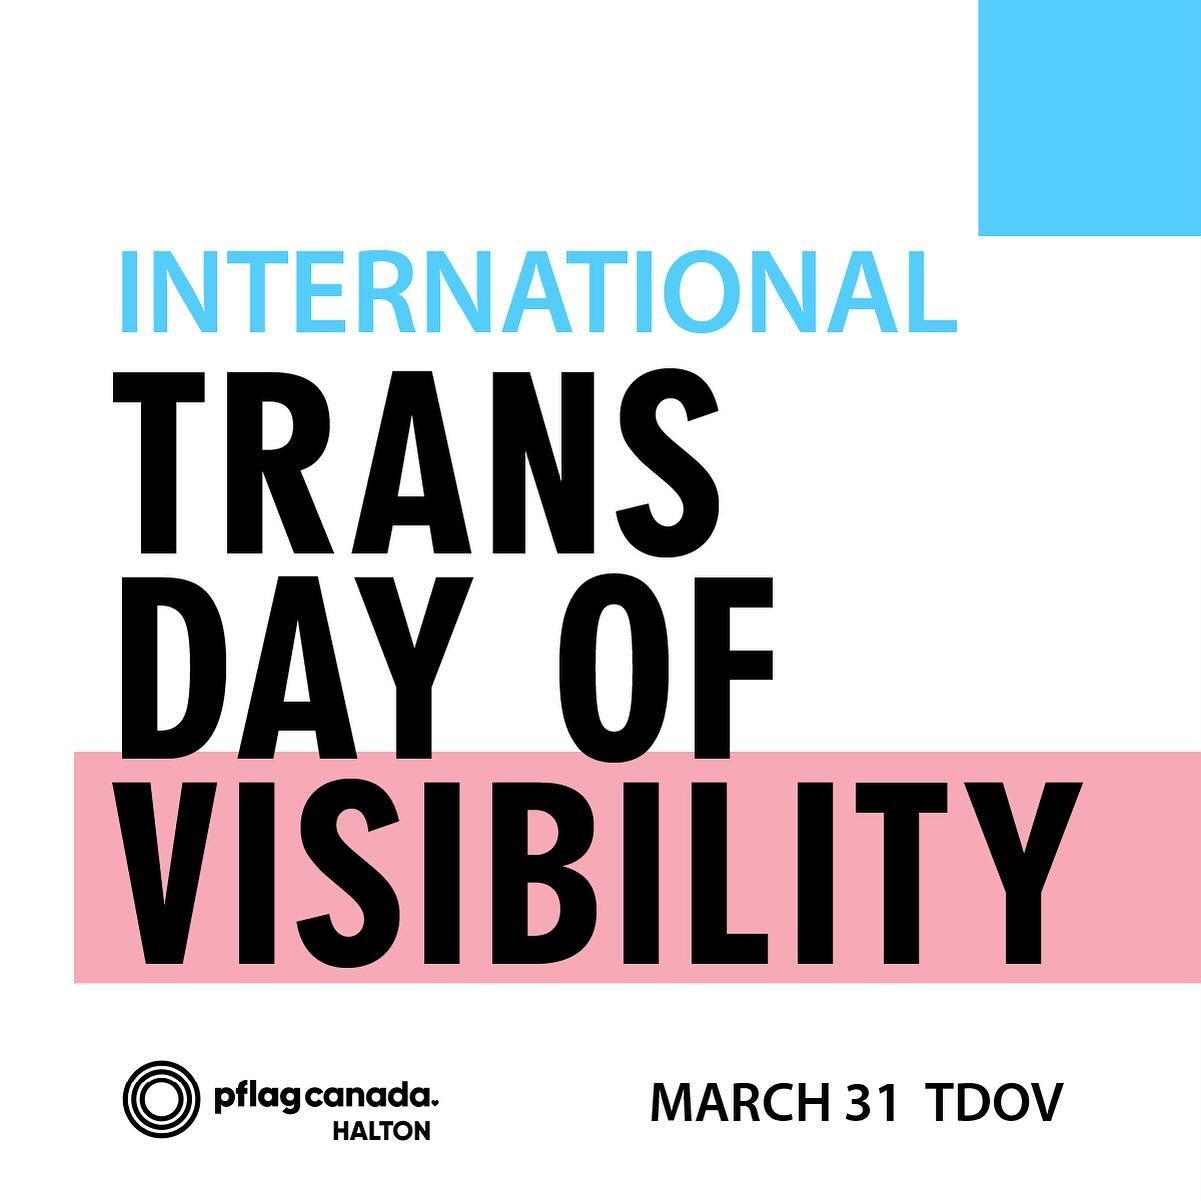 Today is International Transgender Day of Visibility (TDOV) 🏳️&zwj;⚧️ where we celebrate trans joy🩵, trans love🩷and trans courage🤍 in the face of growing discrimination and transphobia. 

We see you. You are loved.
Trans rights are human rights.
